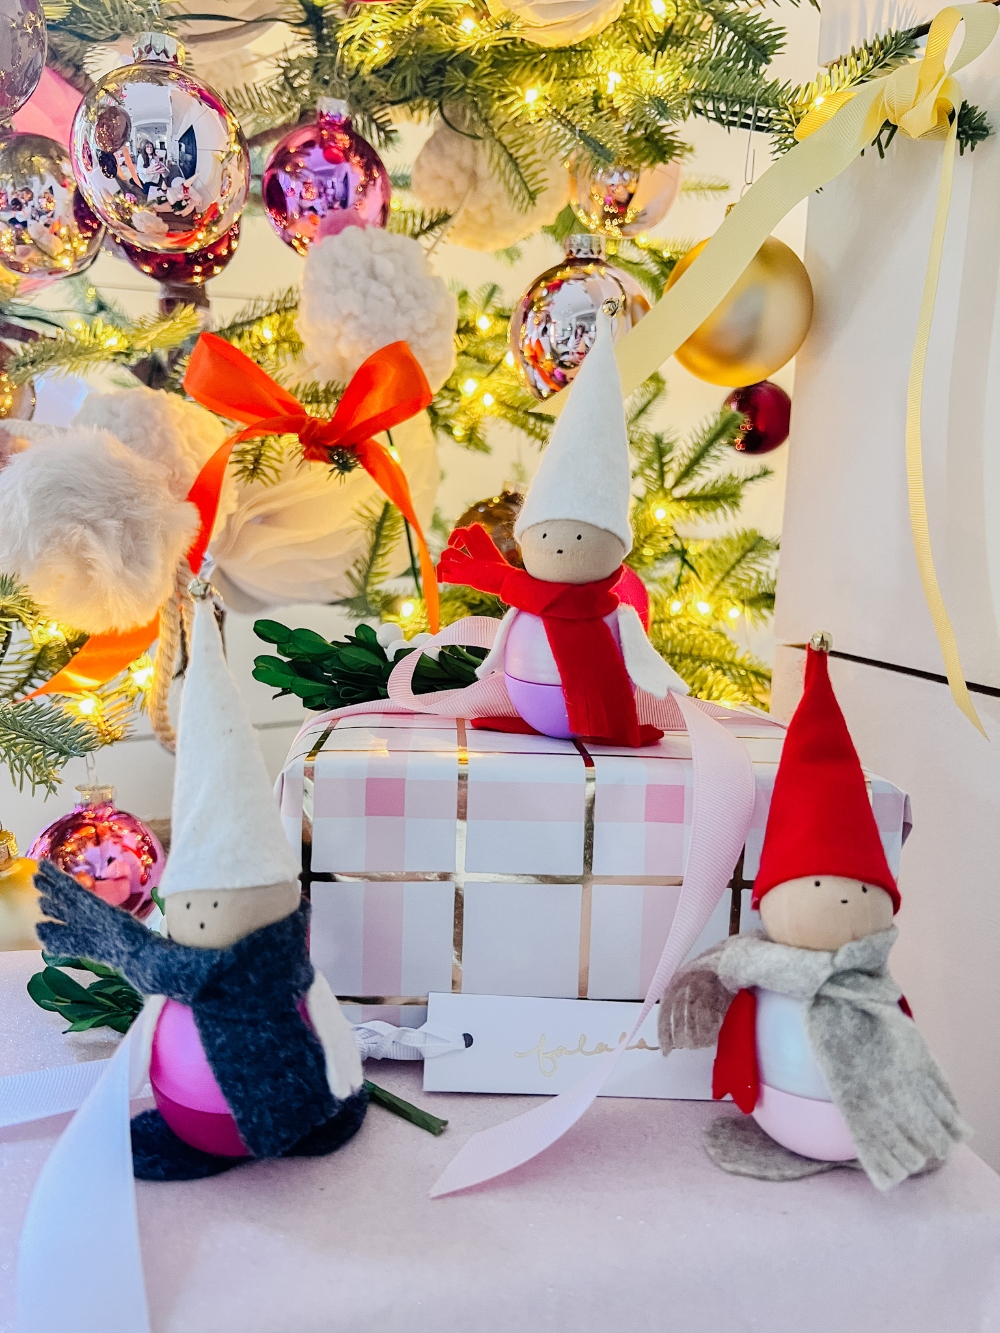 DIY EOS Holiday Gnomes Craft! Add colorful felt to EOS lip balms and transform them into the sweetest gnomes with lip balm inside. The perfect gift idea or present topper! 